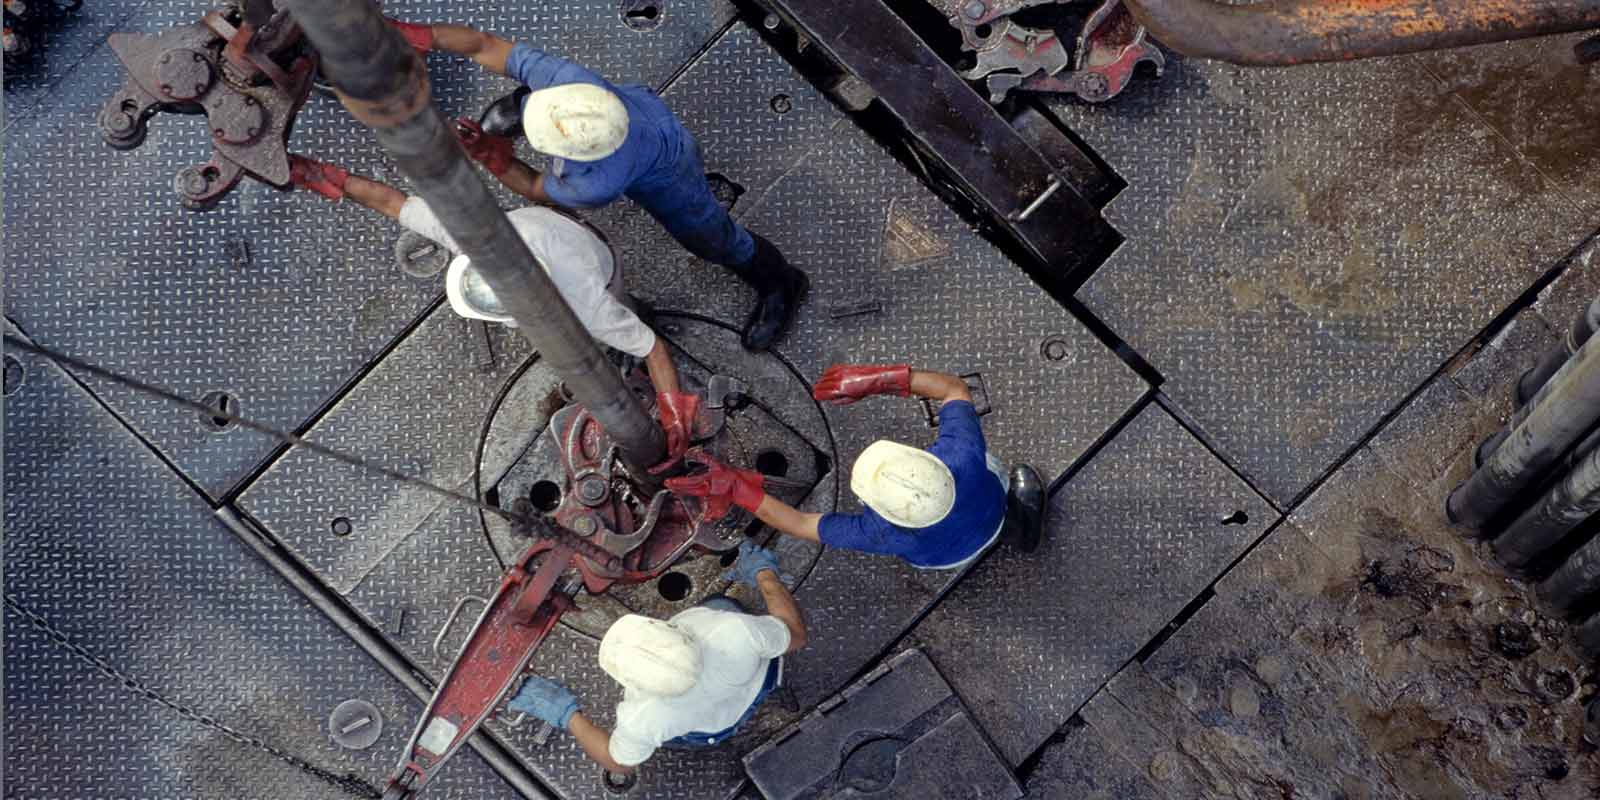 Overhead view of four workers wearing hardhats and using drilling equipment on a rig.